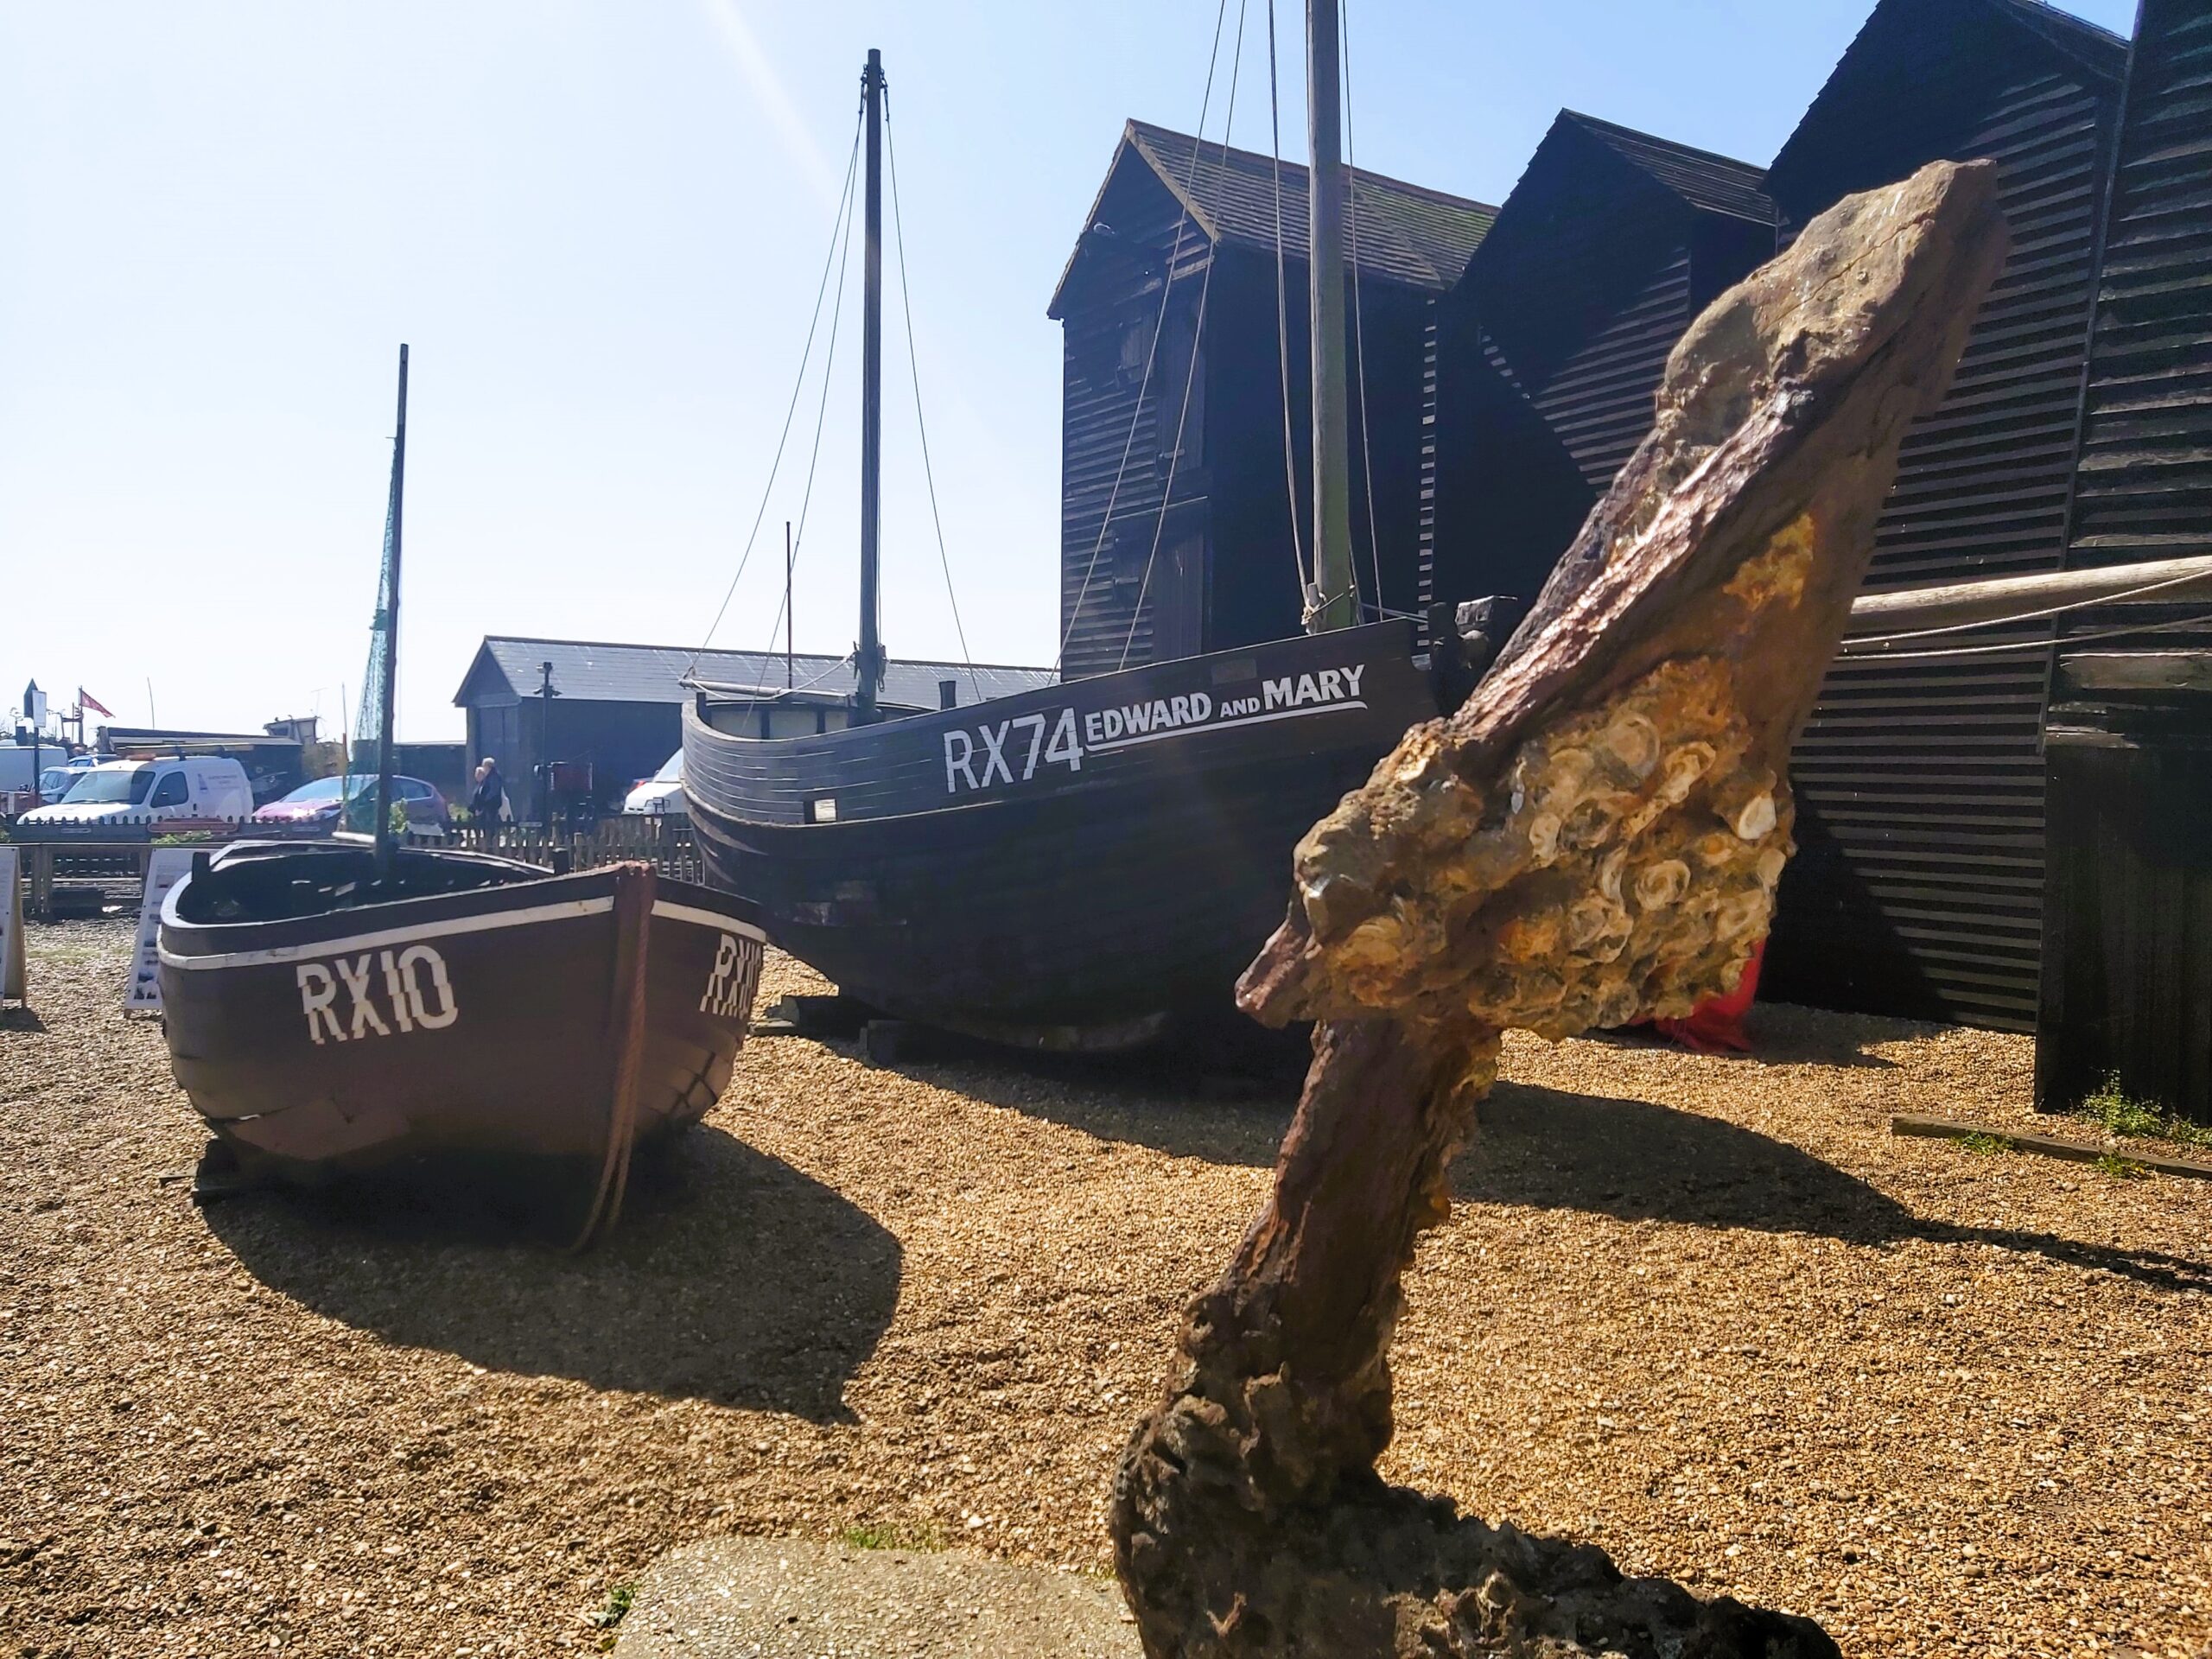 Boats and anchor in Hastings, England